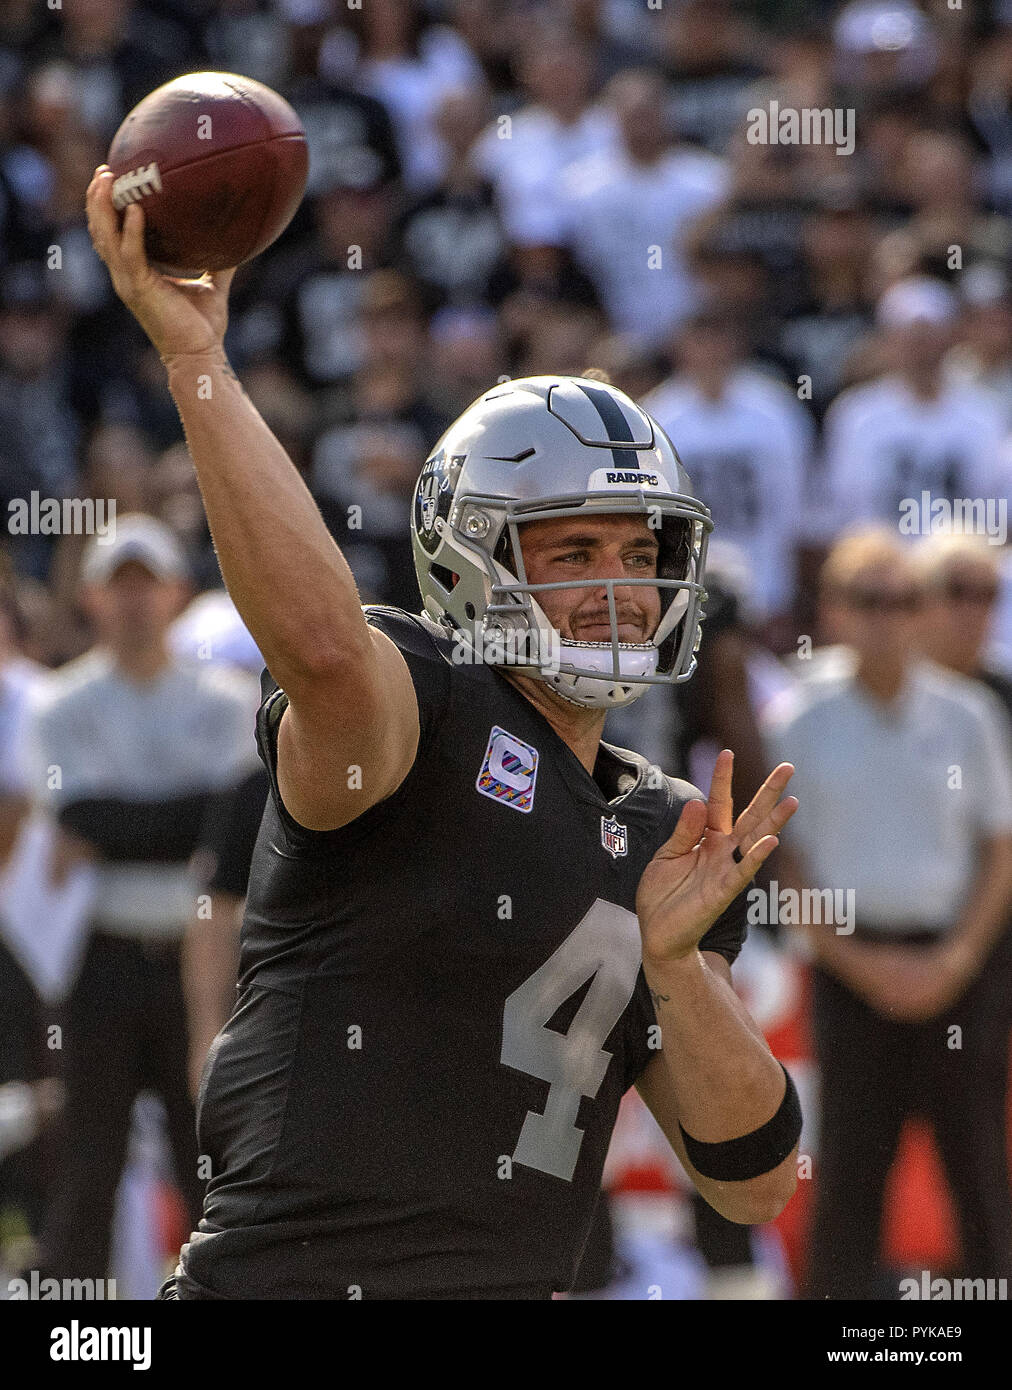 Oakland, California, USA. 28th Oct, 2018. Oakland Raiders quarterback Derek Carr (4) fires pass on Sunday, October 28, 2018, at Oakland-Alameda County Coliseum in Oakland, California. The Colts defeated the Raiders 42-28. Credit: Al Golub/ZUMA Wire/Alamy Live News Stock Photo